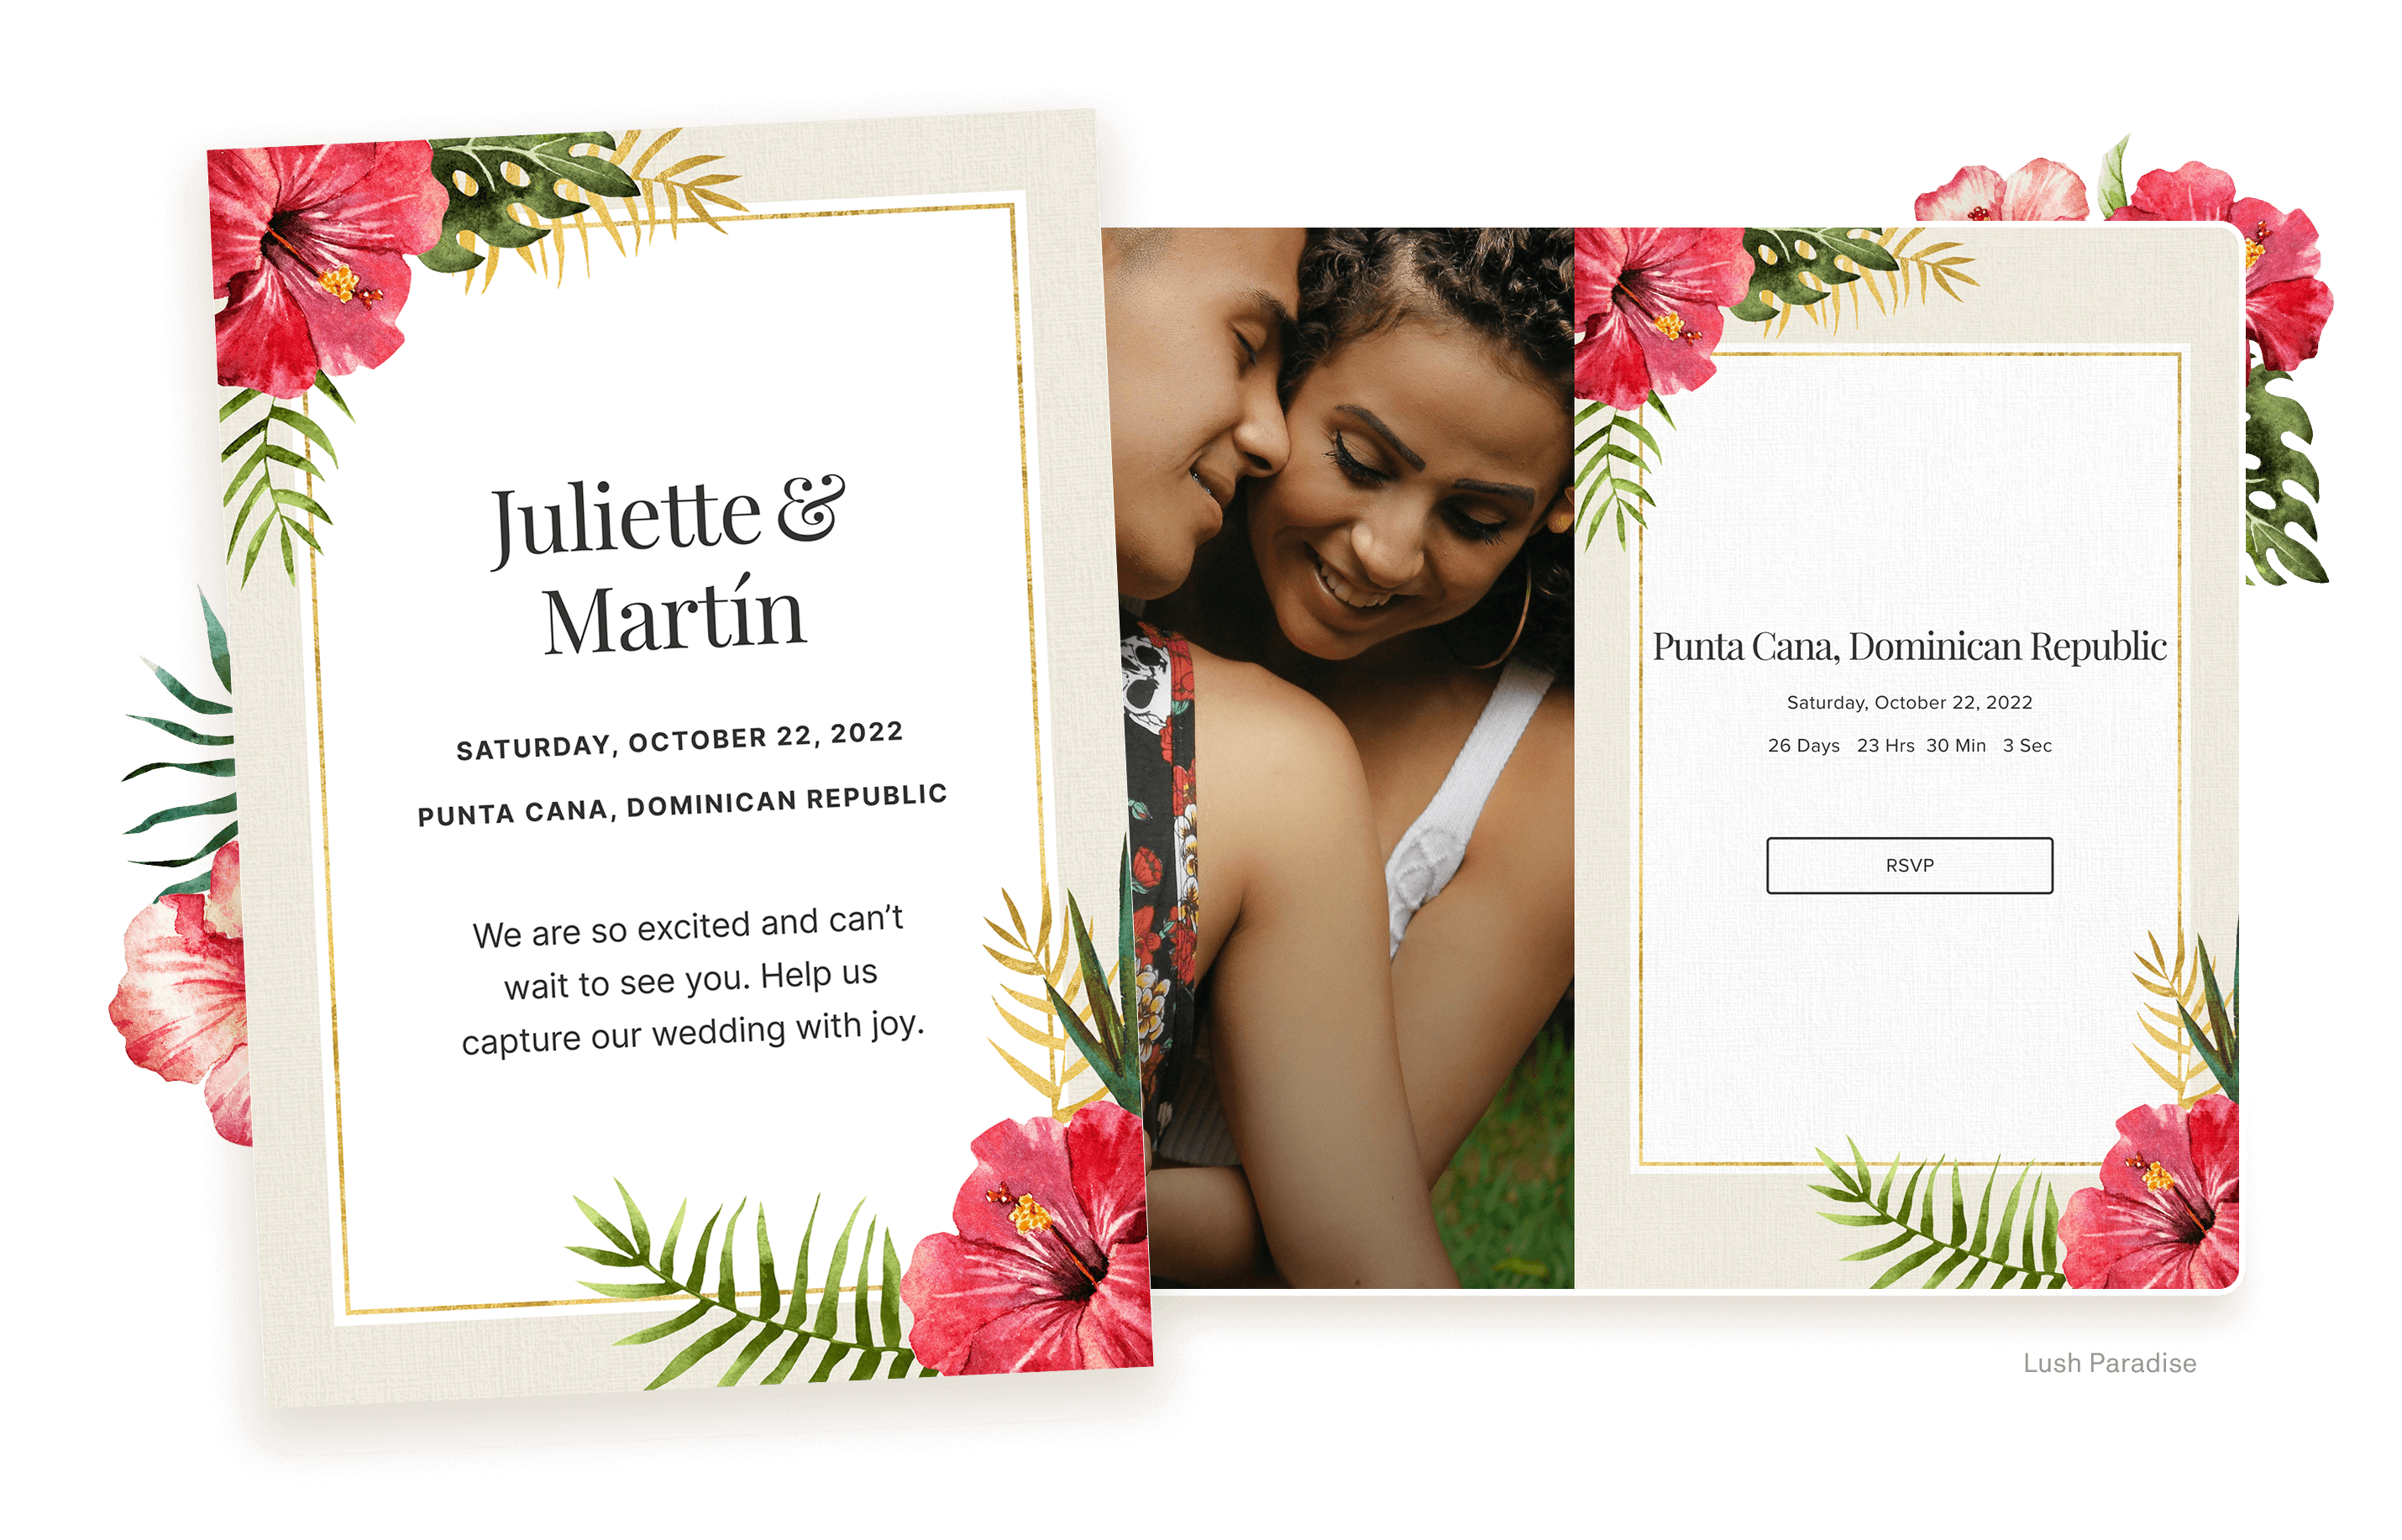 Save the Date Cards, Paper + Free Online Templates